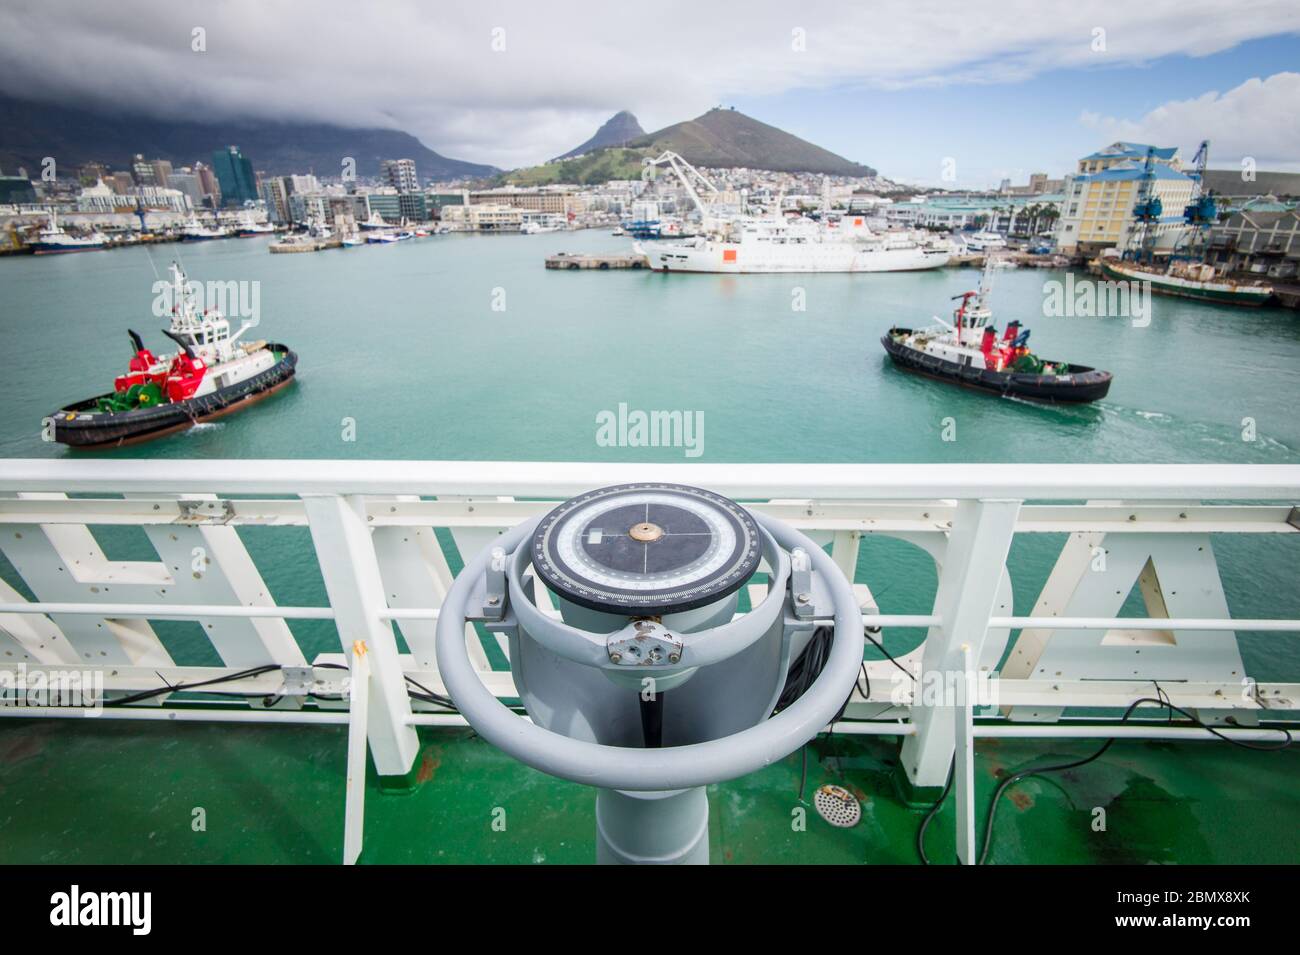 Table Bay harbor at Victoria and Alfred Waterfront is the gateway to Cape Town, Western Cape Province, South Africa, a beautiful city. Stock Photo